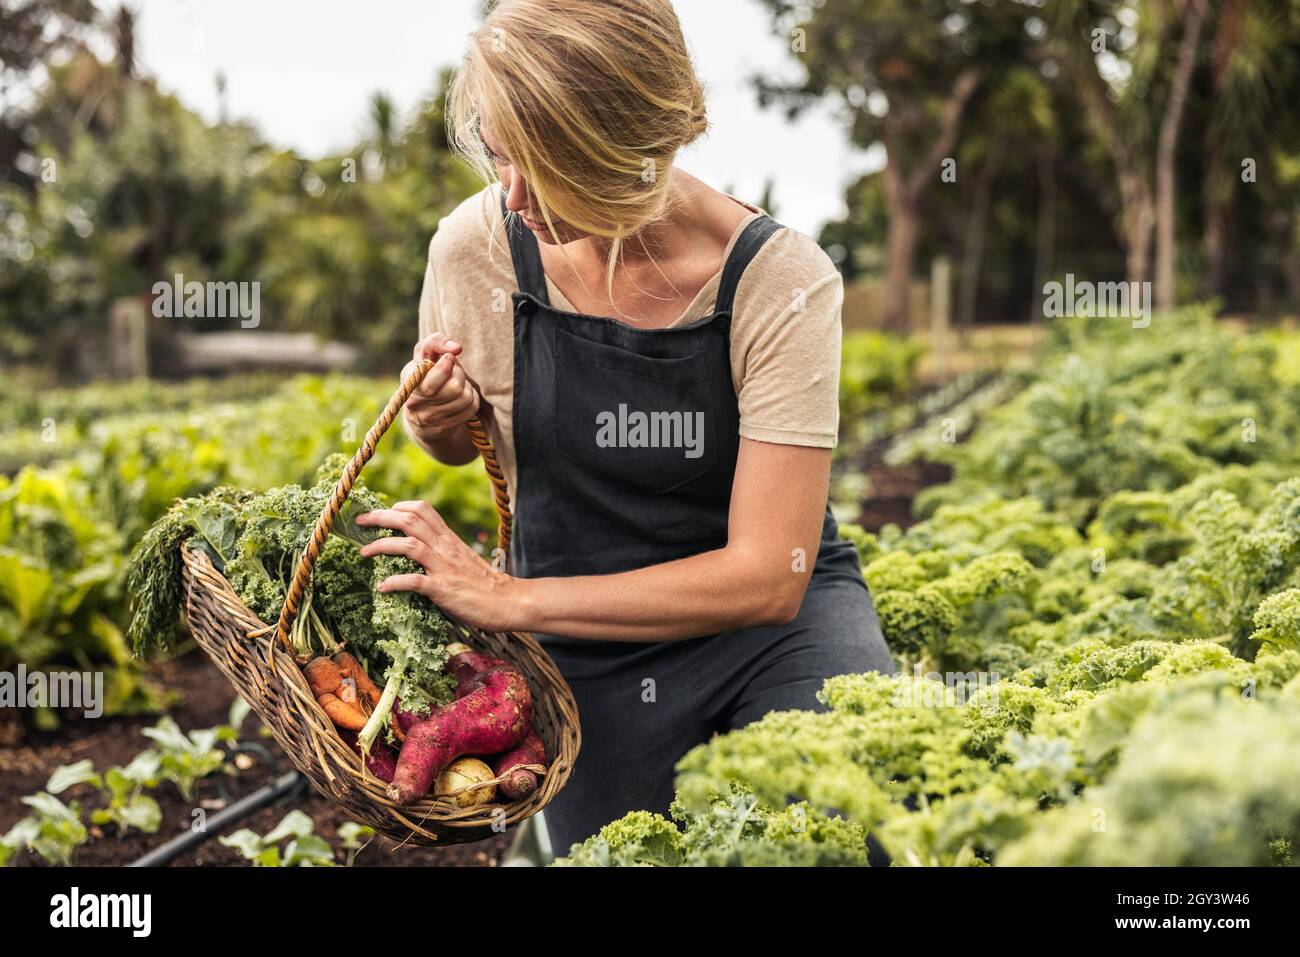 Picking fresh vegetable produce. Young female gardener gathering fresh kale into a basket in a vegetable garden. Self-sufficient young woman harvestin Stock Photo